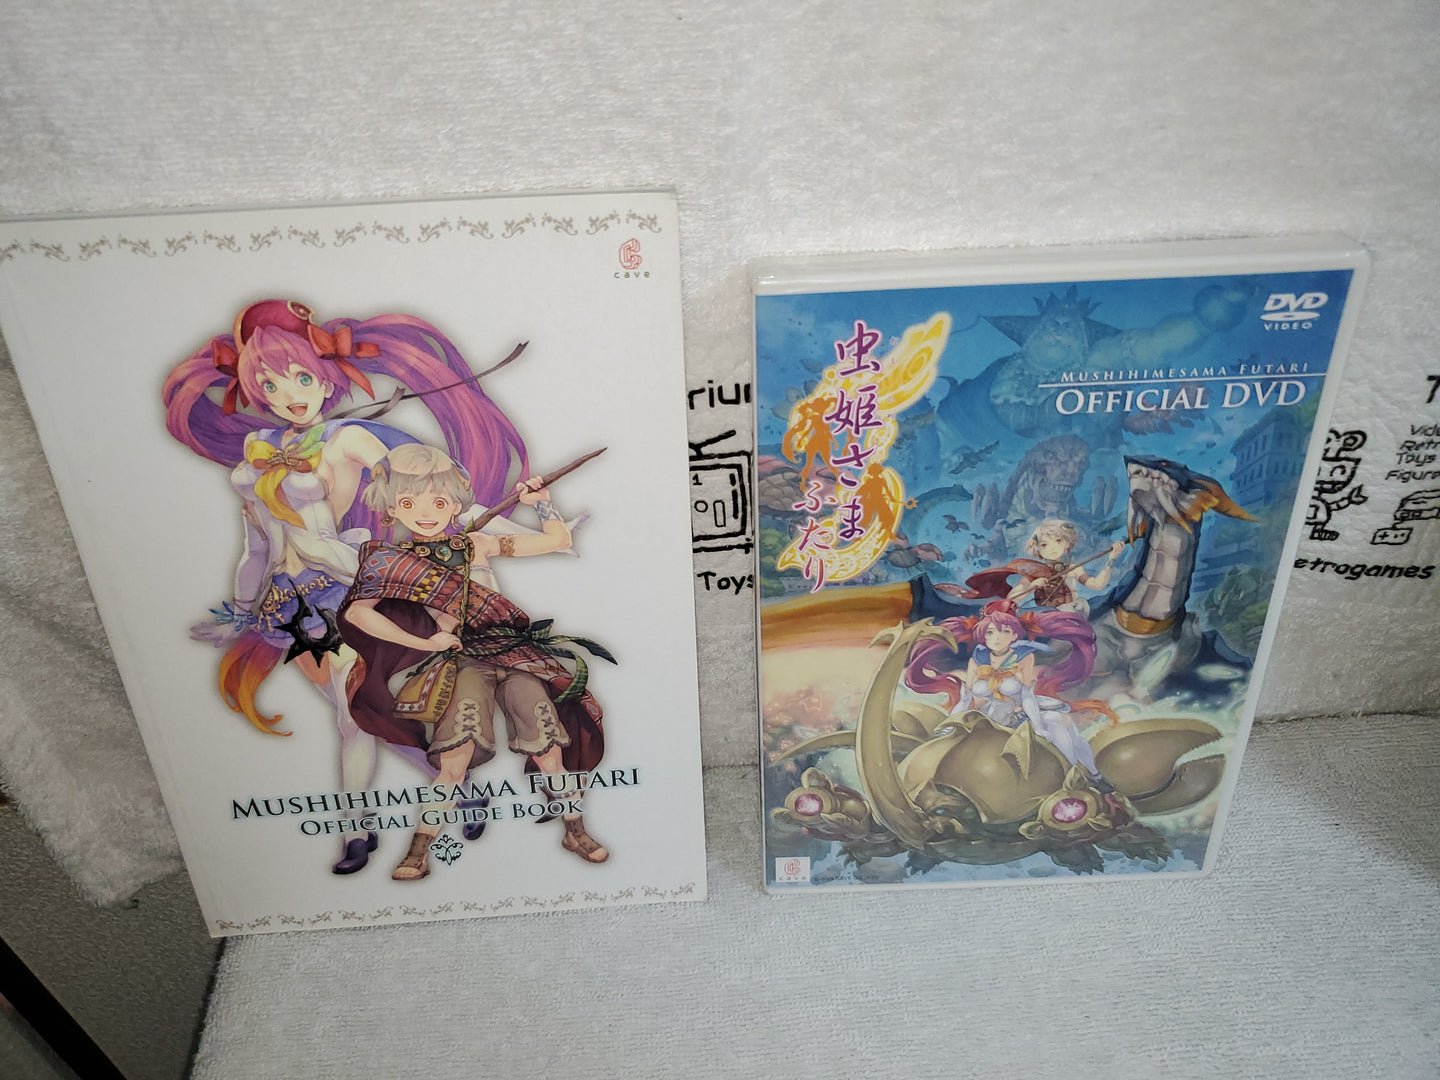 Mushihimesama Futari OFFICIAL SUPERPLAY DVD [with booklet] - OFFICIAL original cave